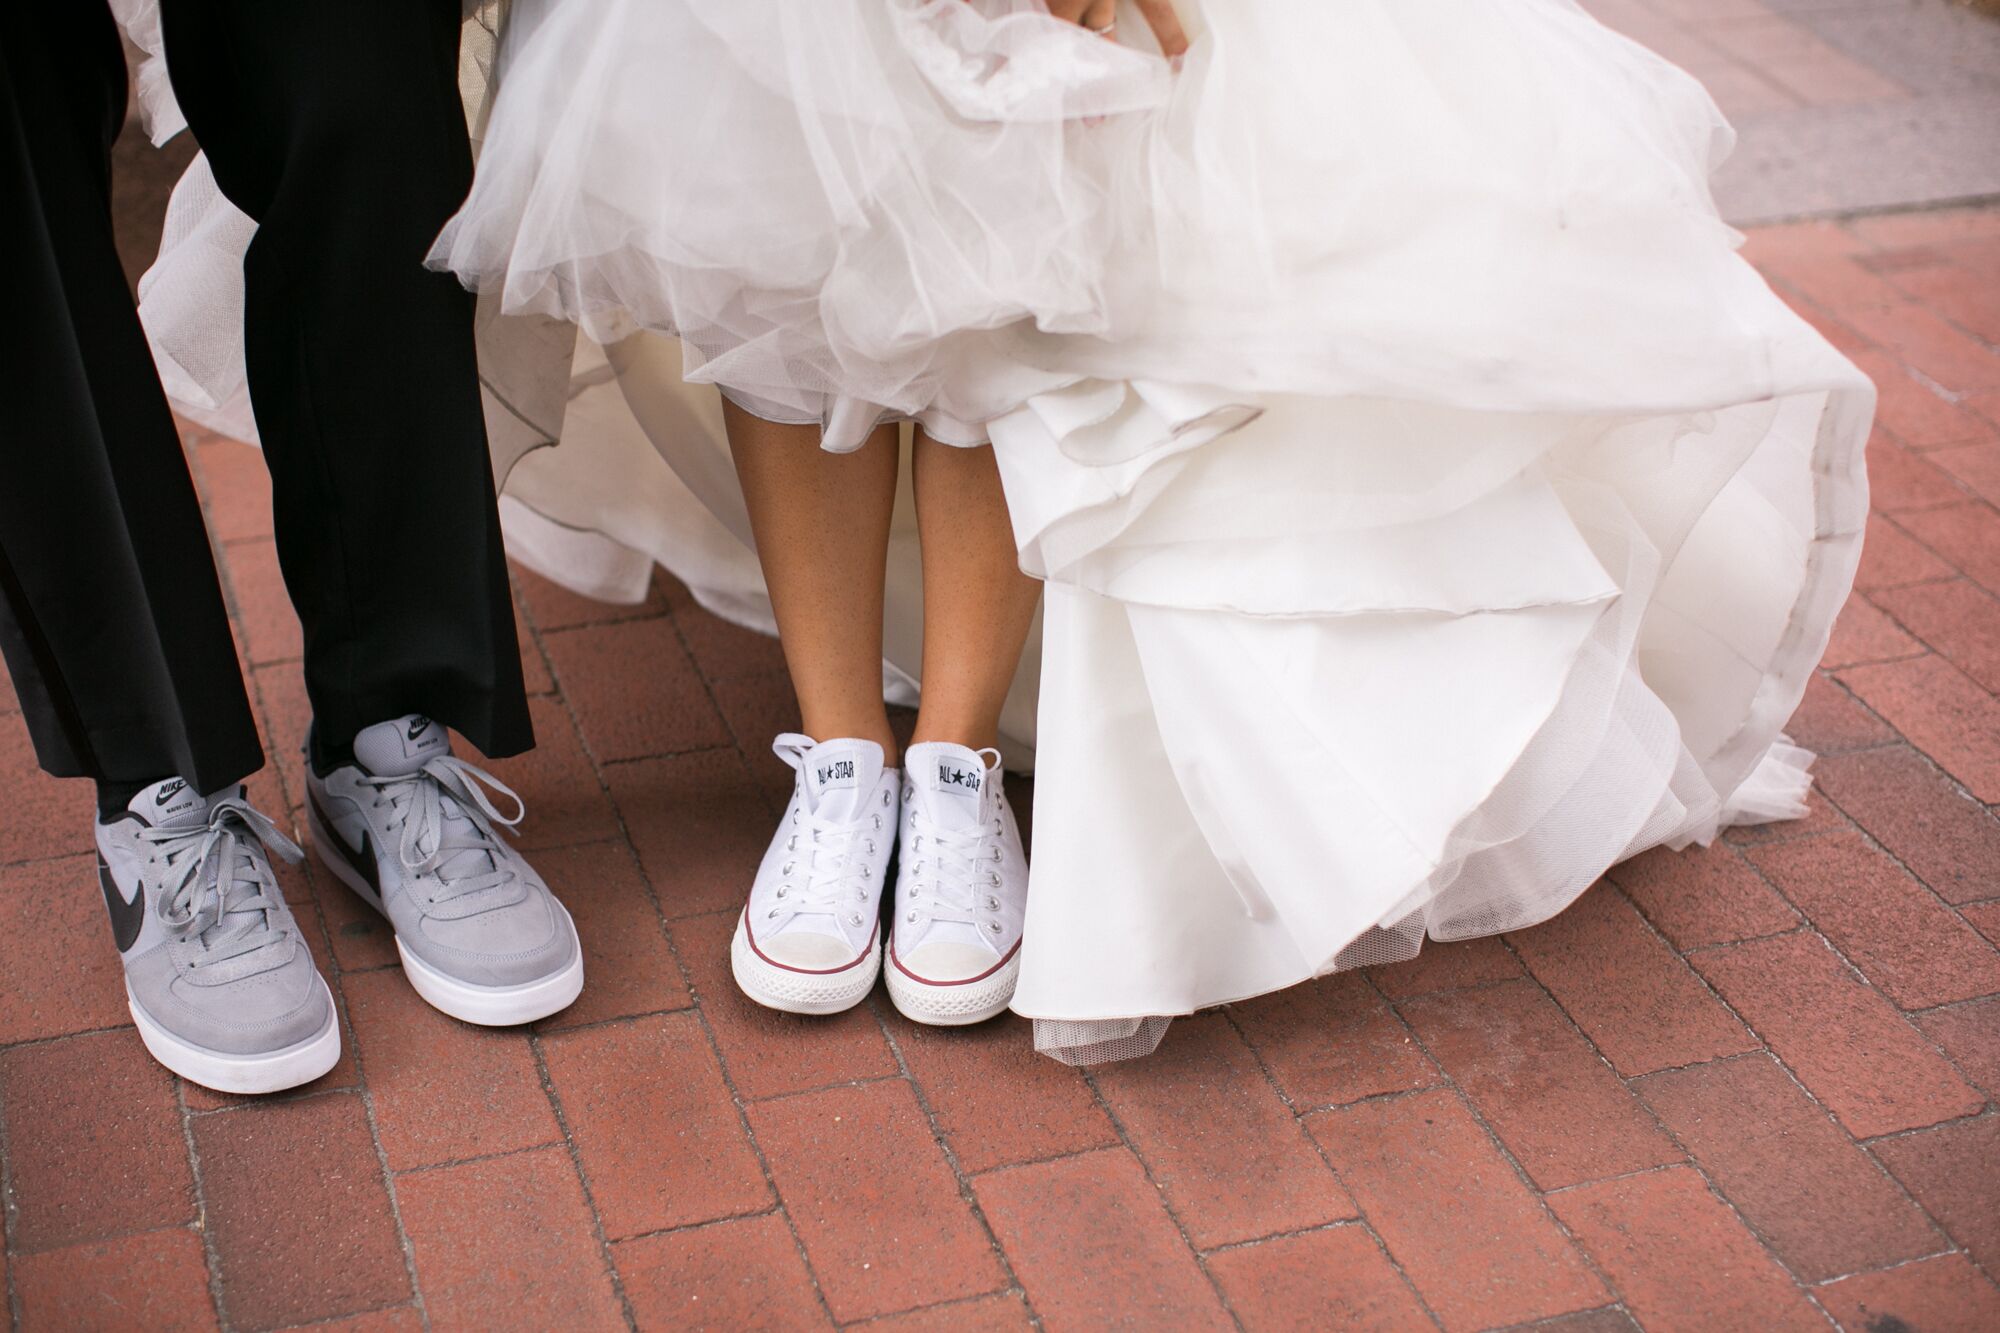 wedding dress with converse shoes